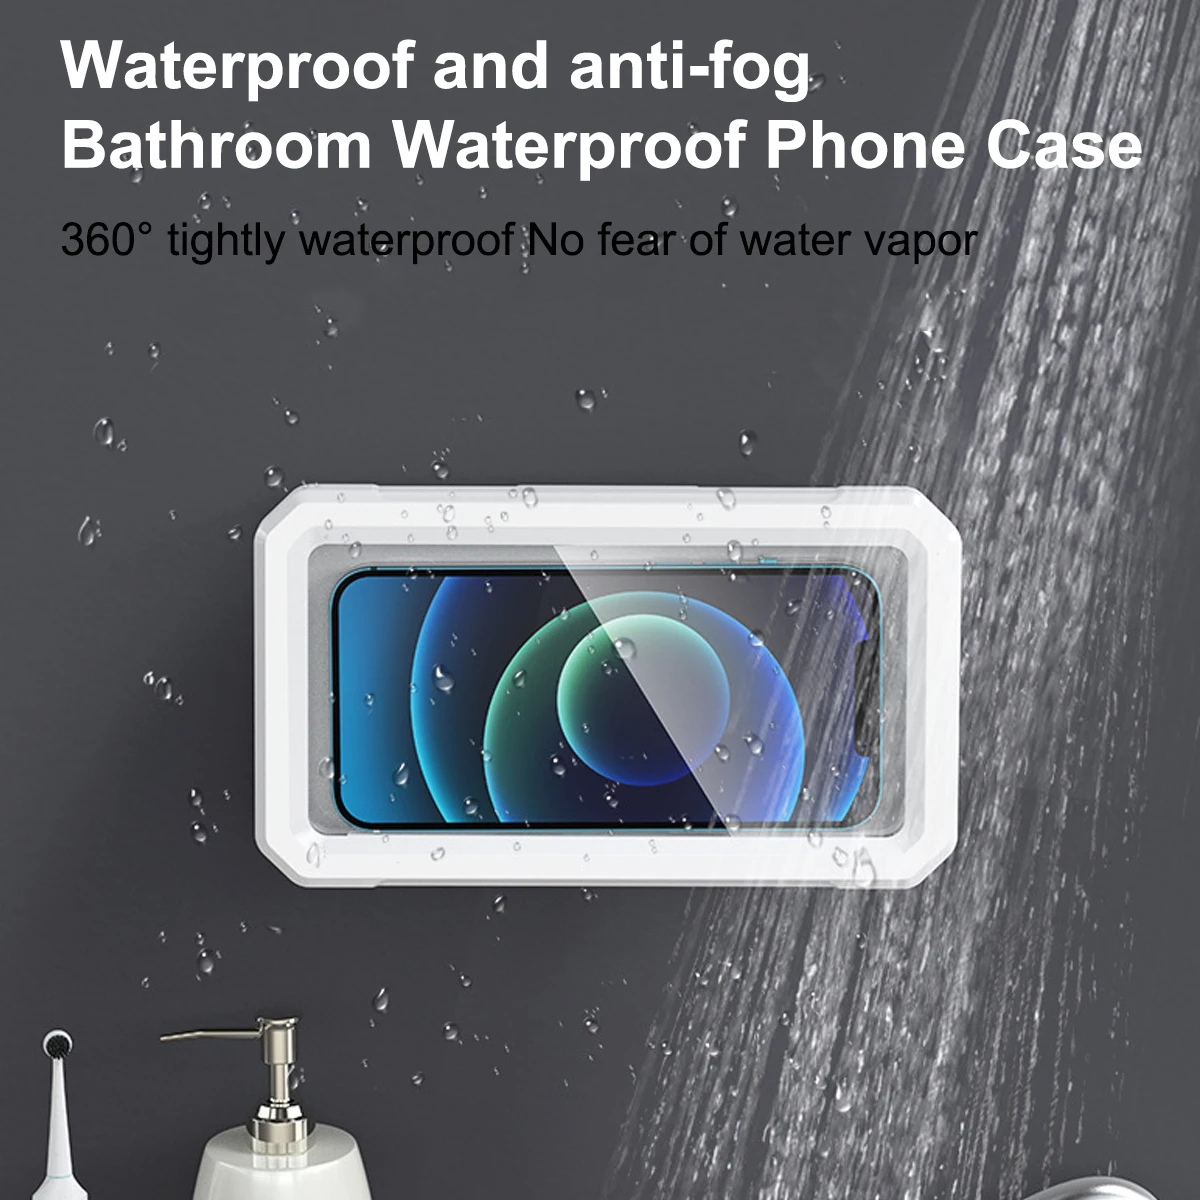 Wall Mounted Phone Holder for Bathroom Kitchen Creative Waterproof Shower  Phone Case Self-Adhesive Sealing Phone Cover with Hook - AliExpress